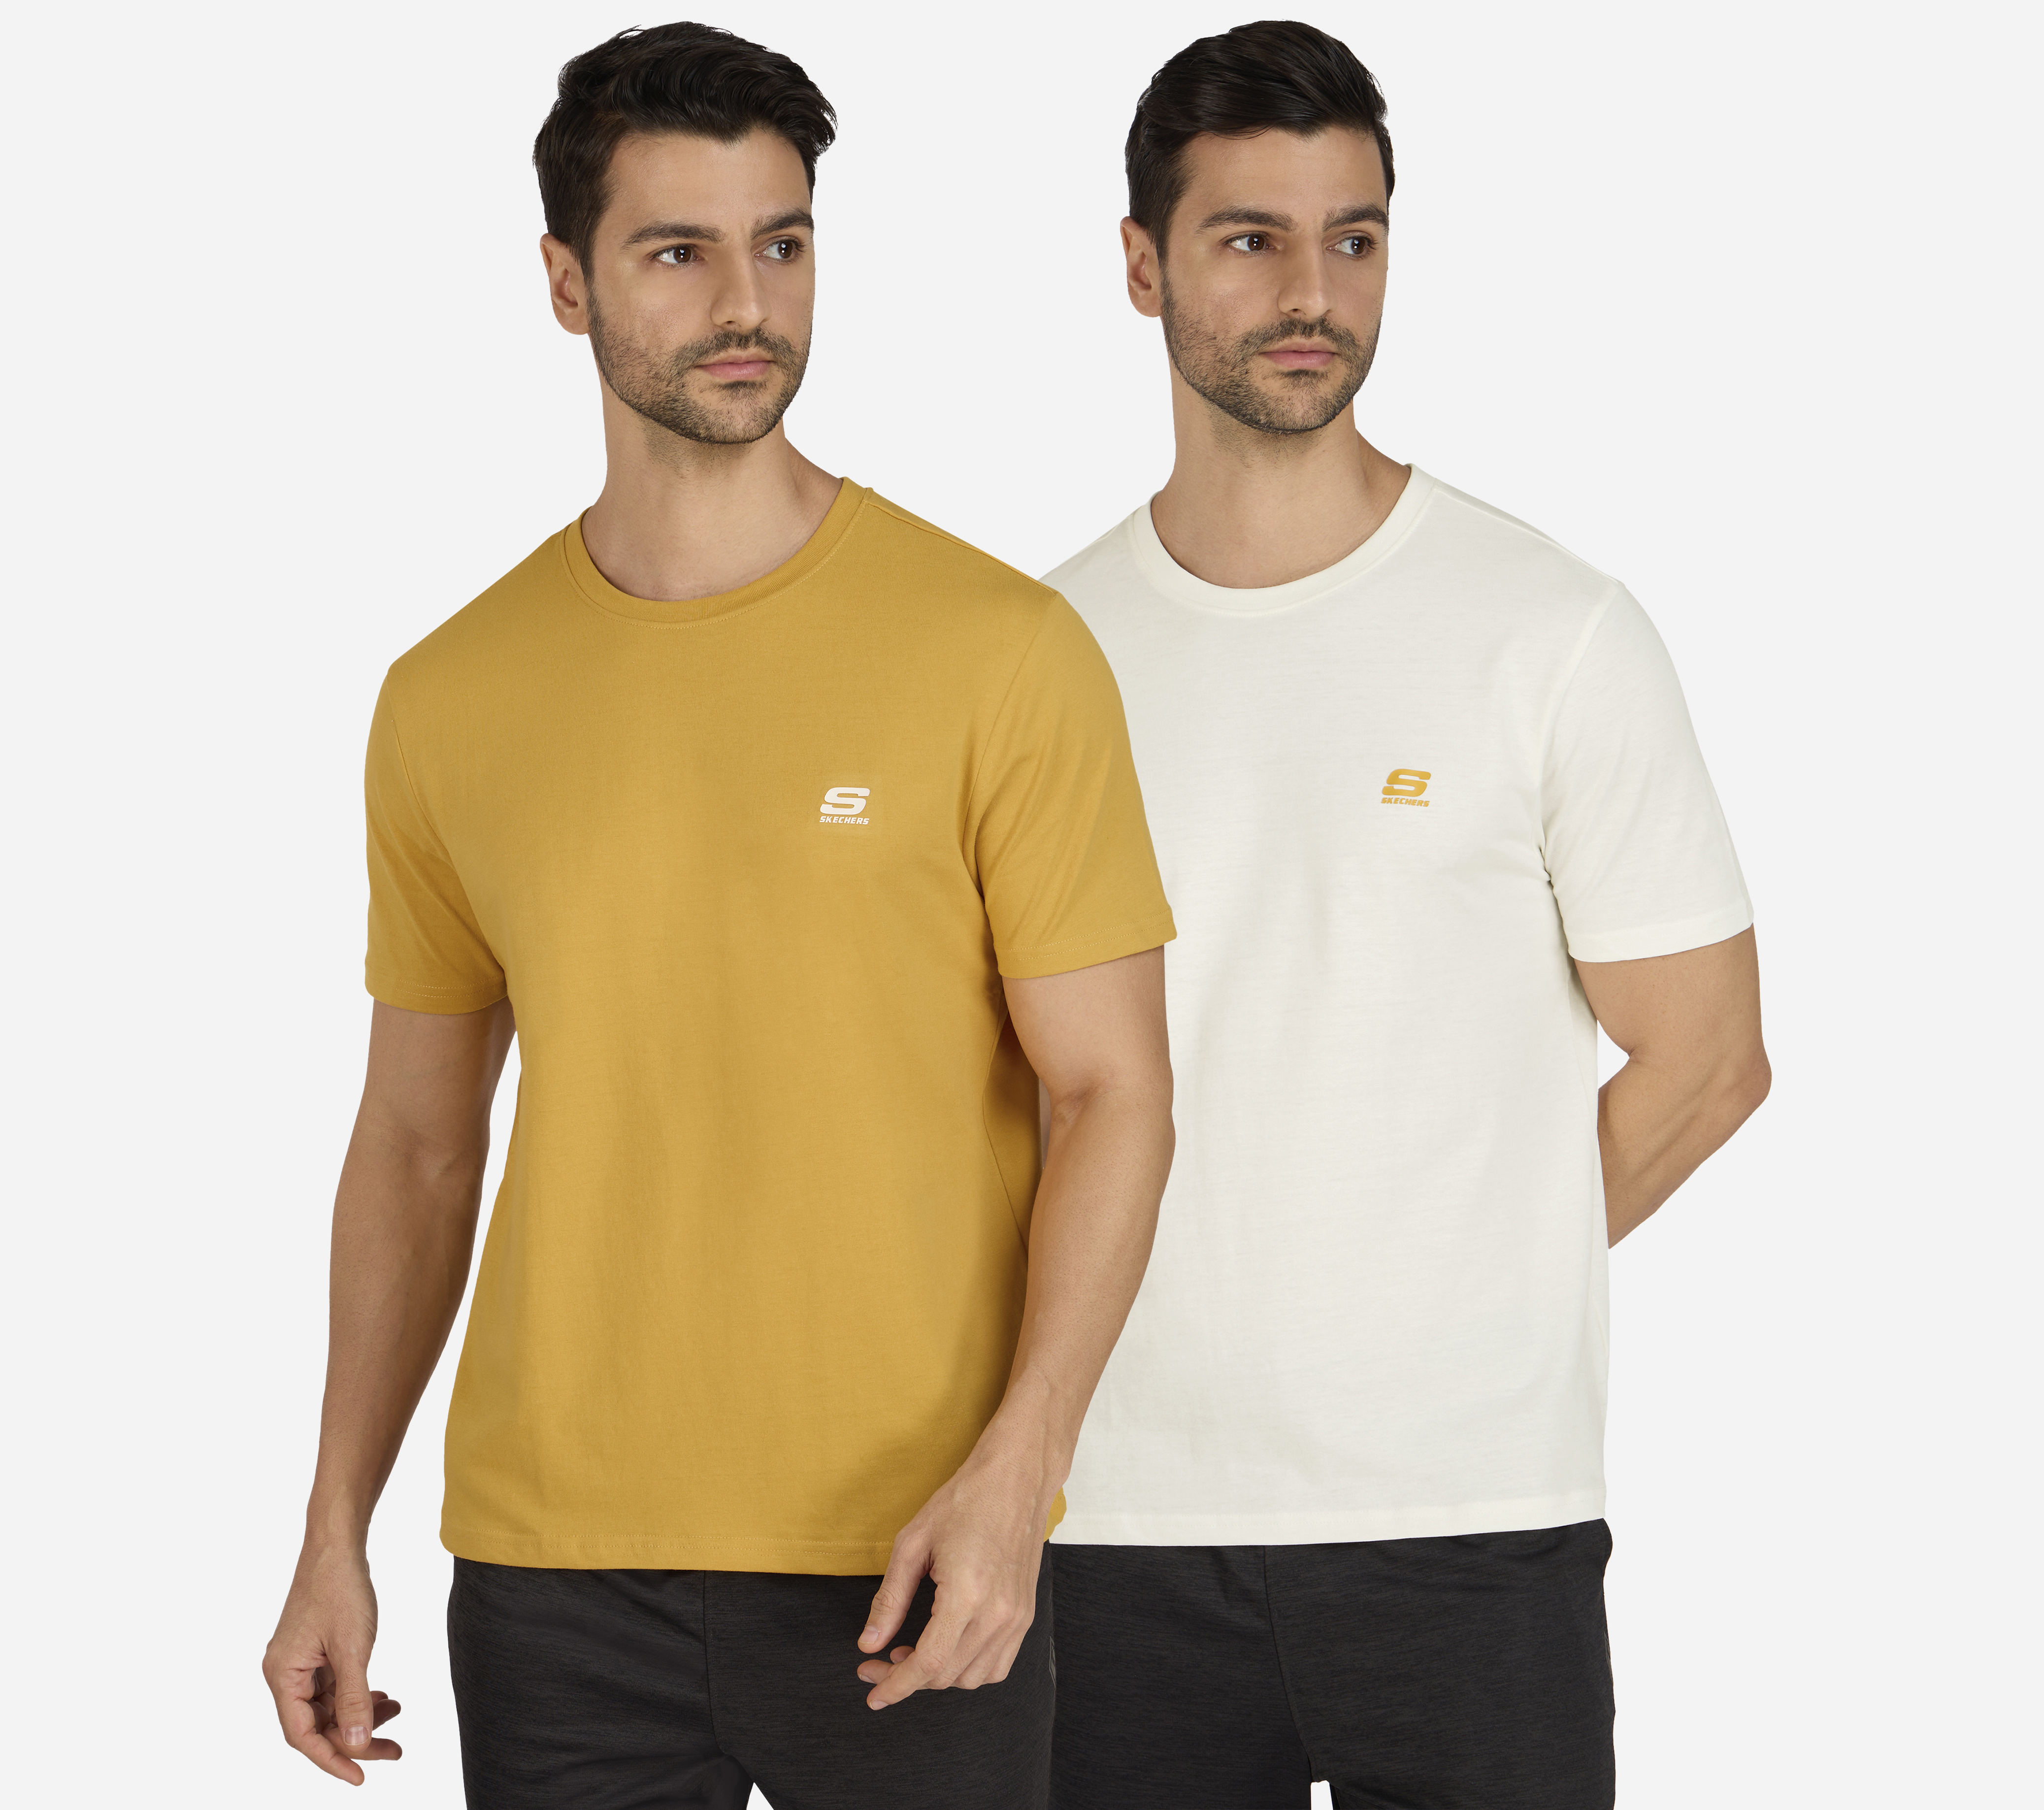 SS CREWNECK TEE-2PC PACK, WHITE YELLOW Apparels Lateral View